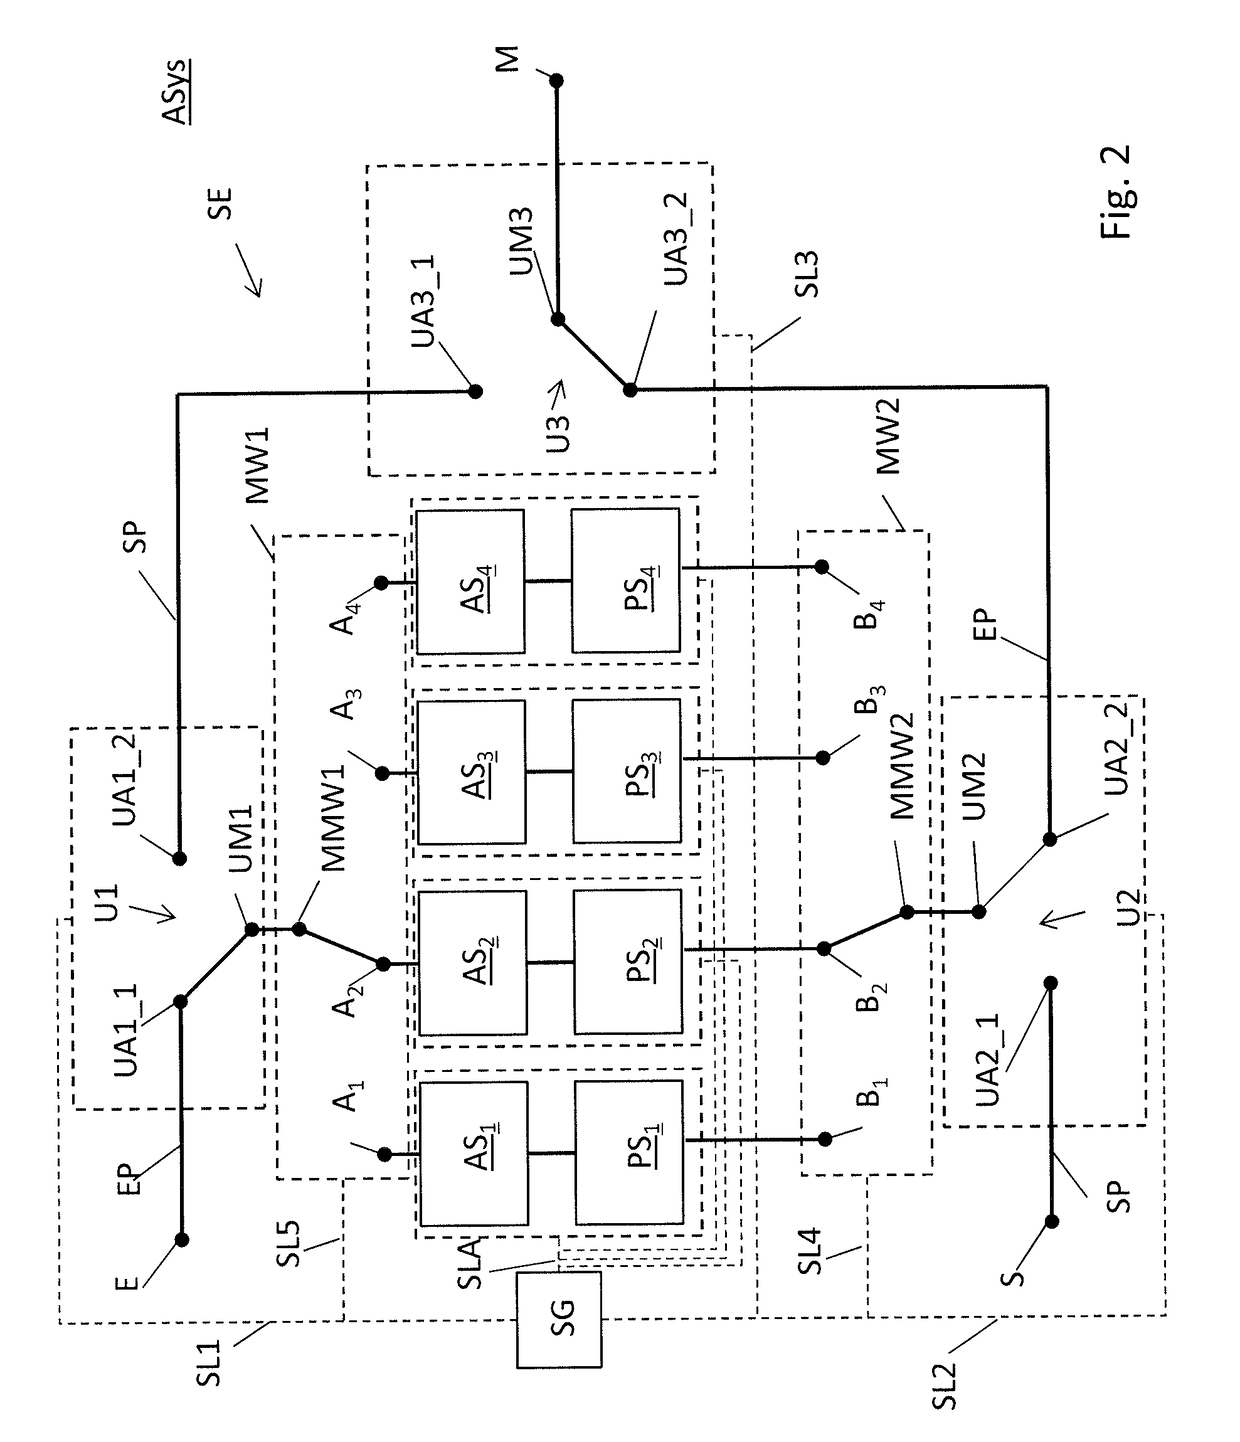 Transceiver element for an active, electronically controlled antenna system